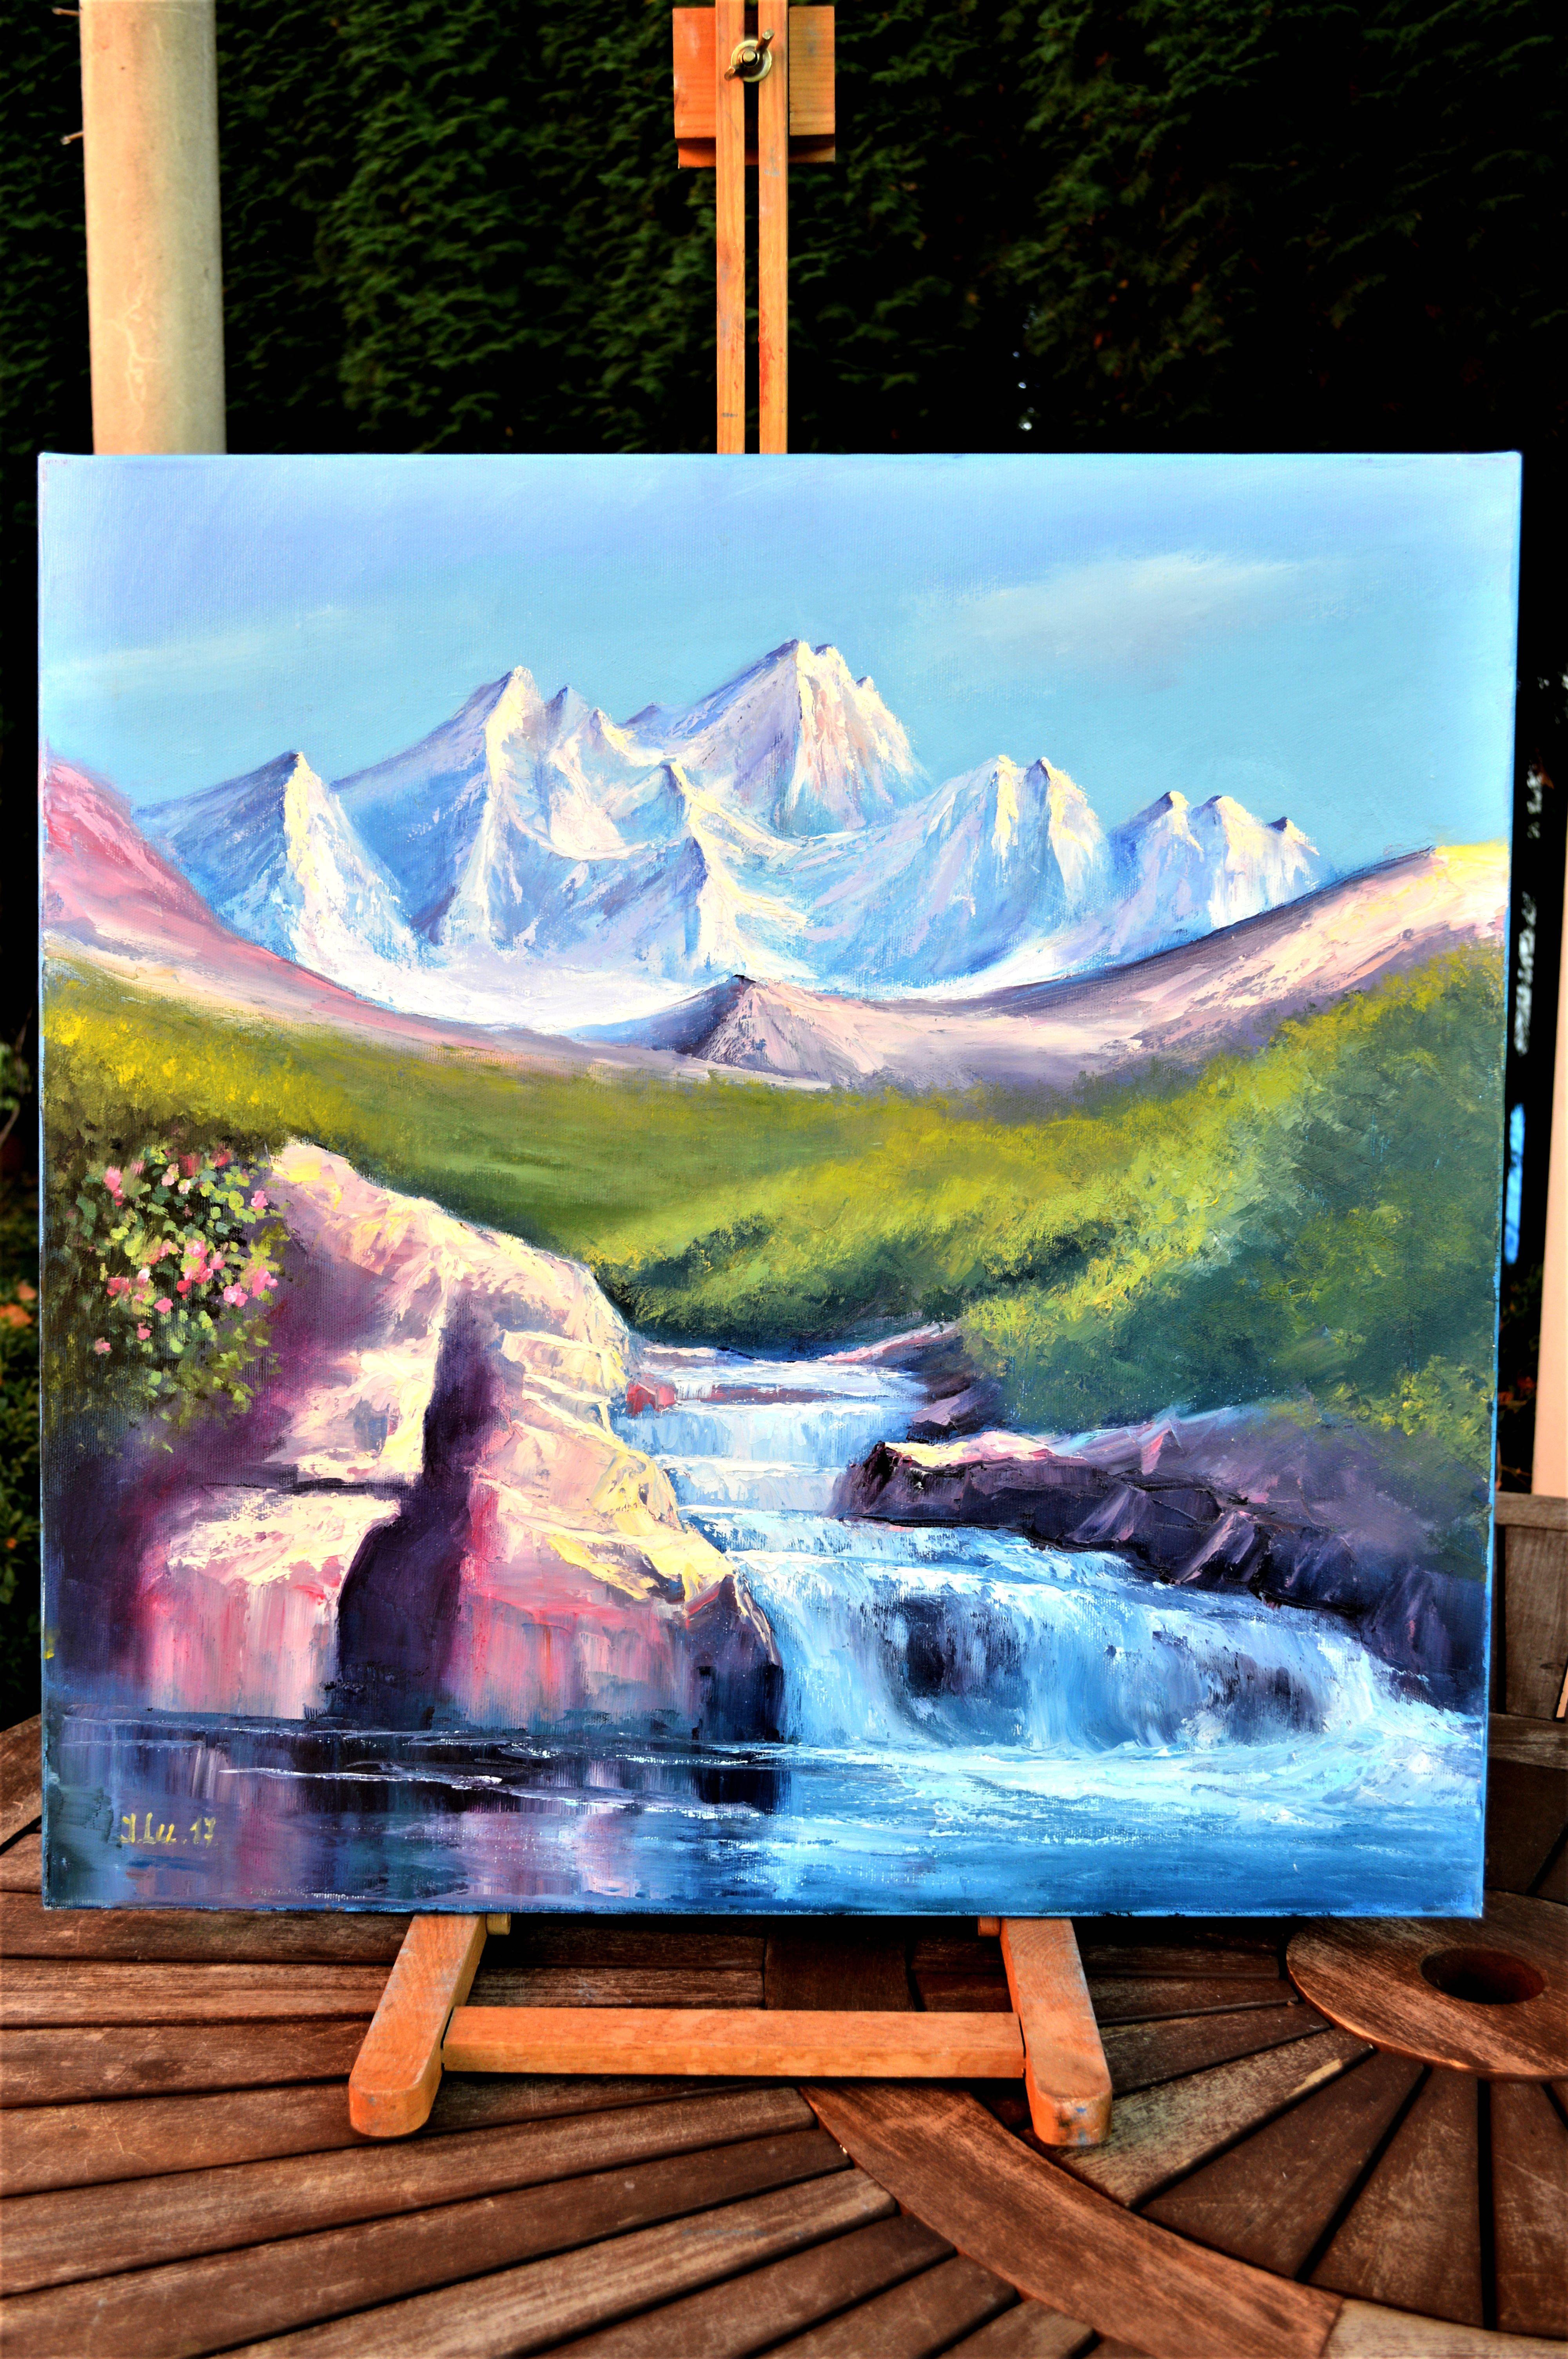 In this oil painting, I've captured the raw beauty of nature, blending expressionism's emotion with impressionism's light dance. The mountain's majestic tranquility meets the river's dynamic spirit, reminding us of life's continuous flow and the